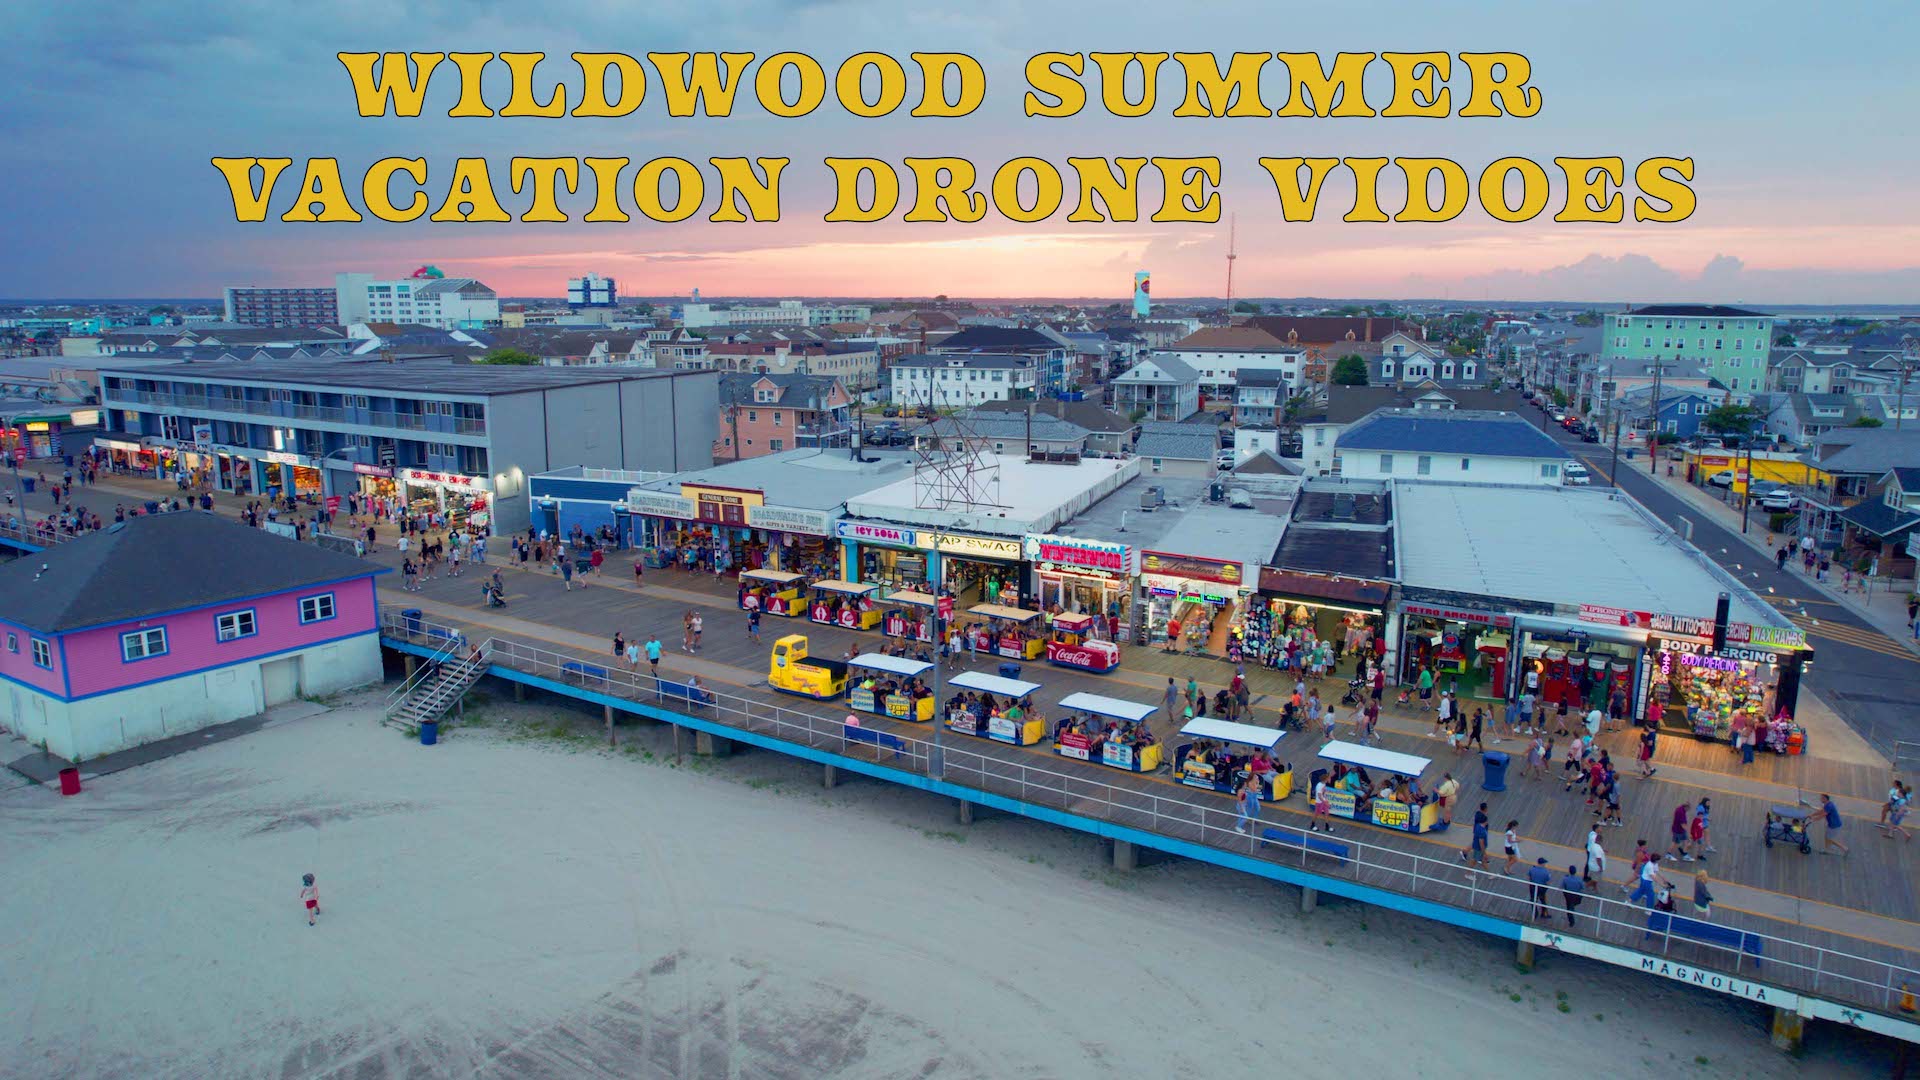 The Wildwood Boardwalk on a warm summer evening with two tramcars going by